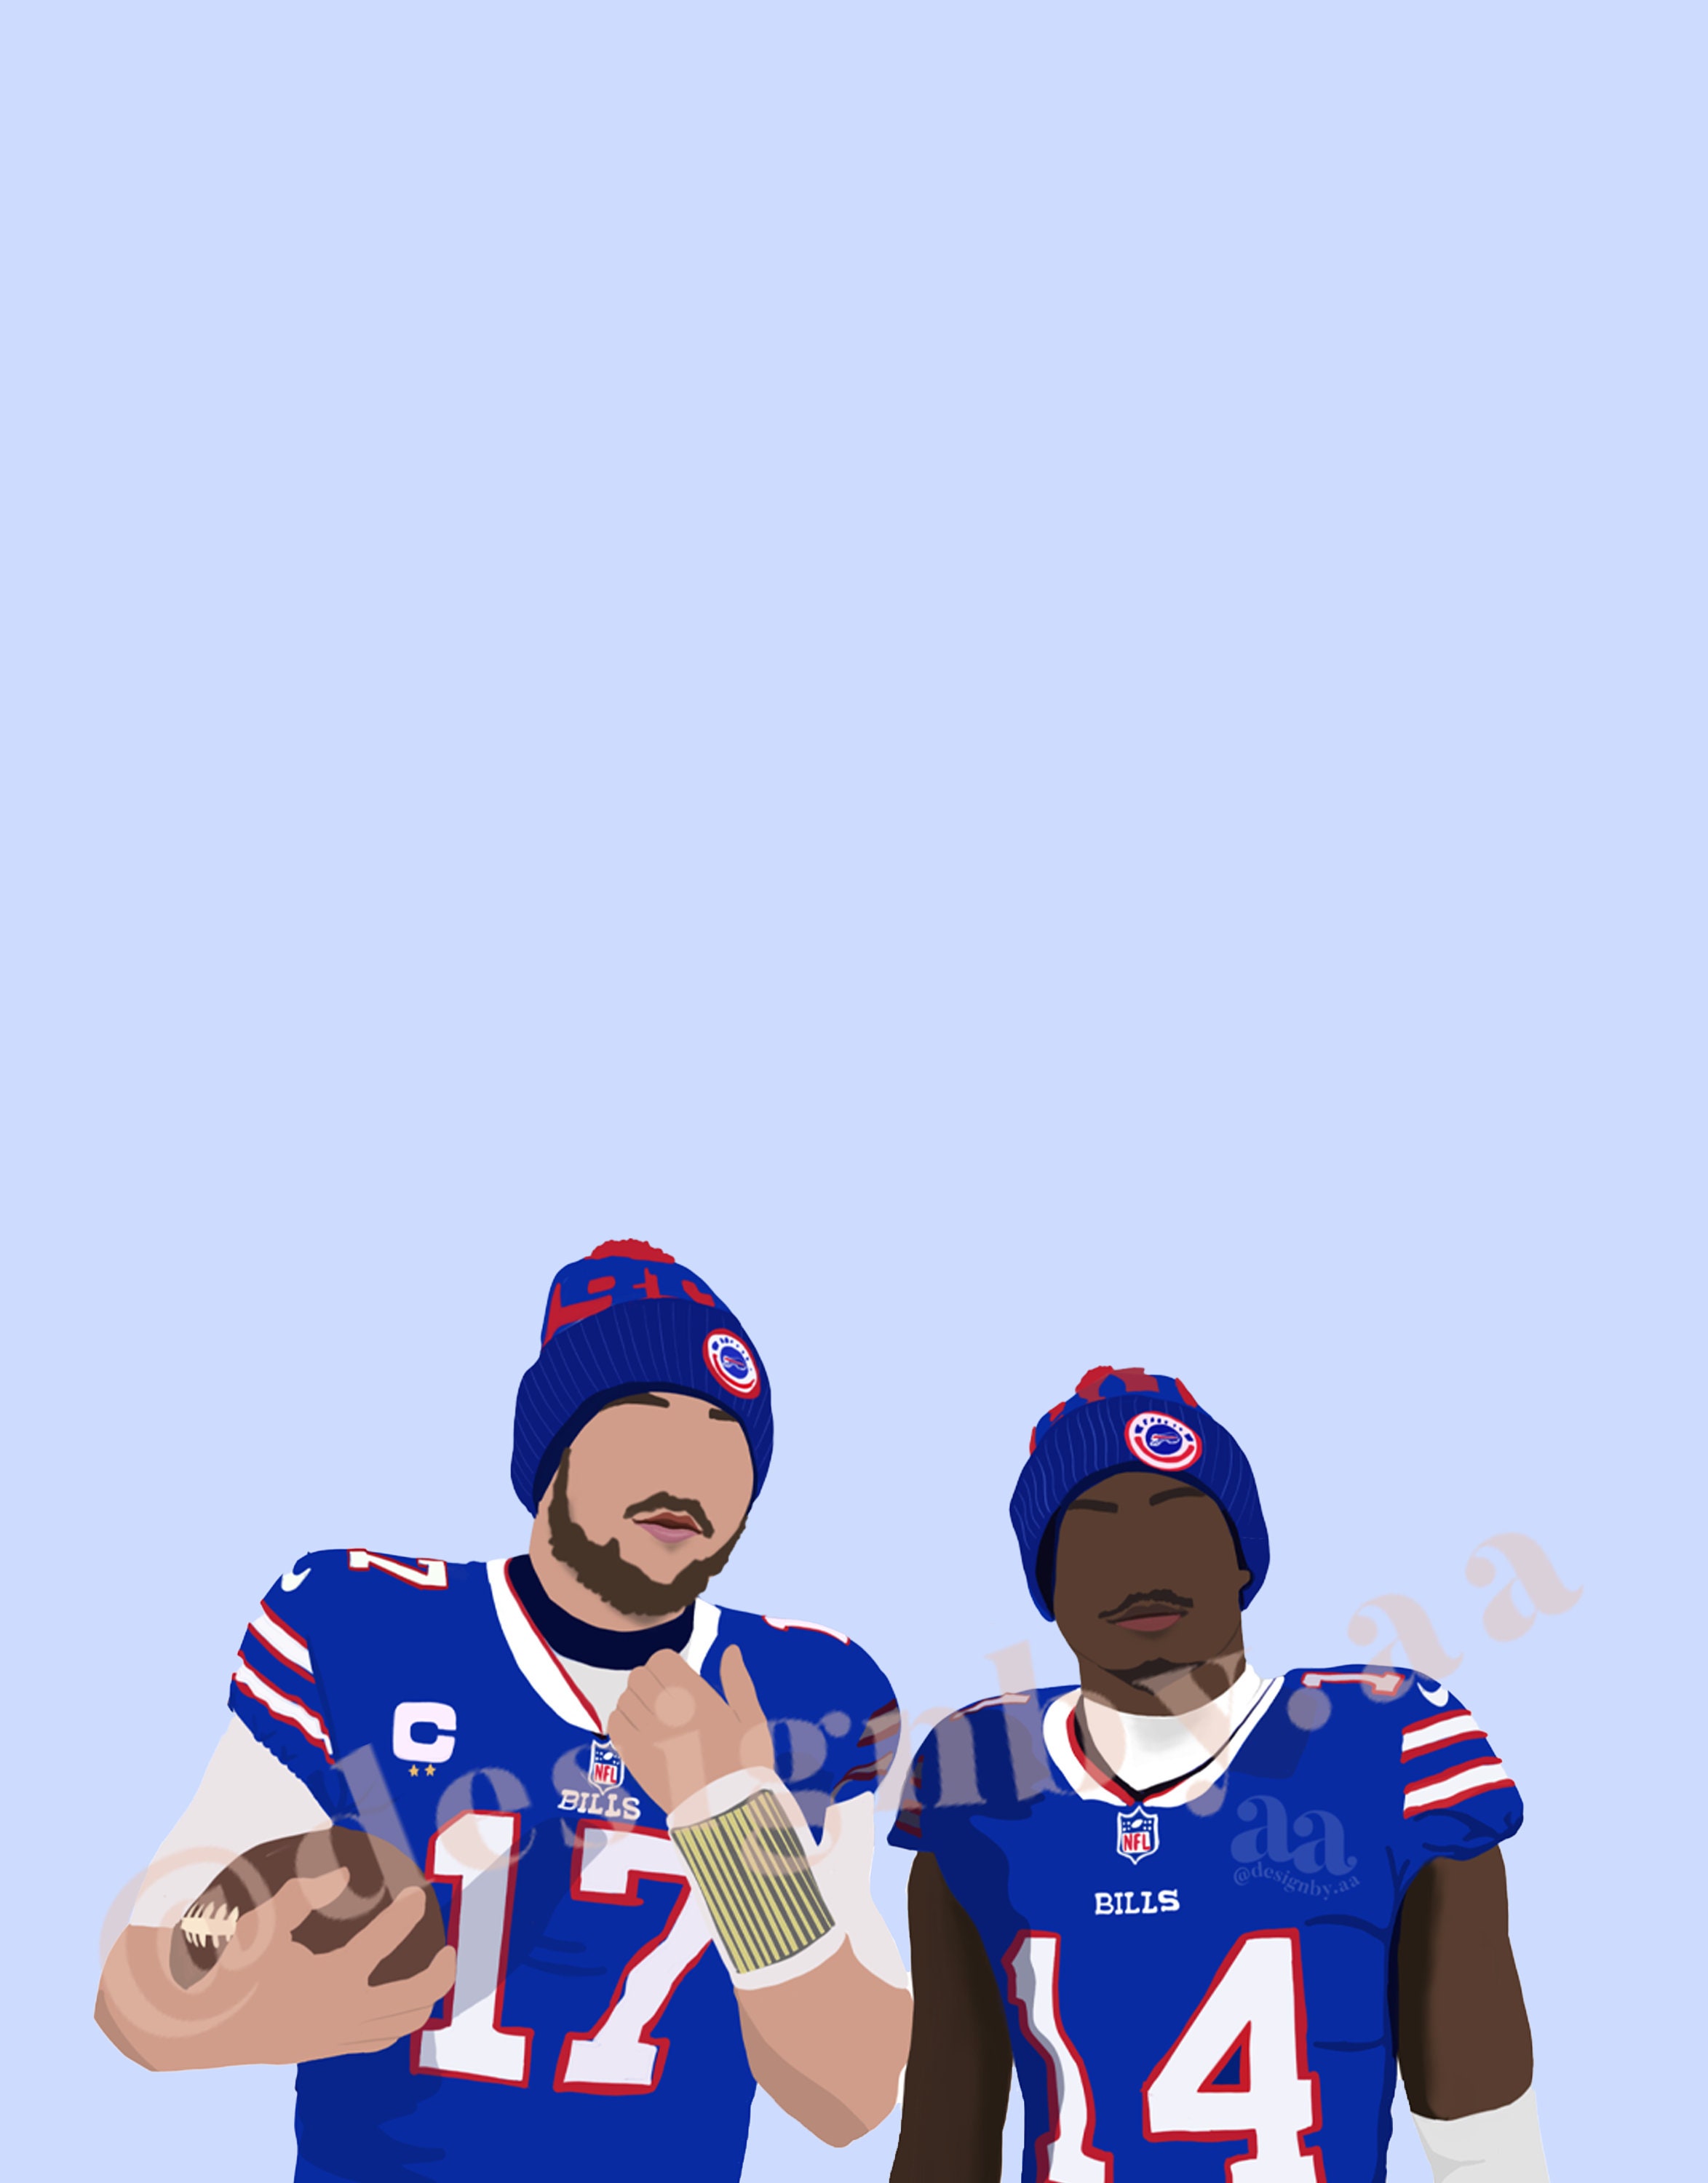 Josh Alan and Stefon Diggs painting that I just finished! Go Bills